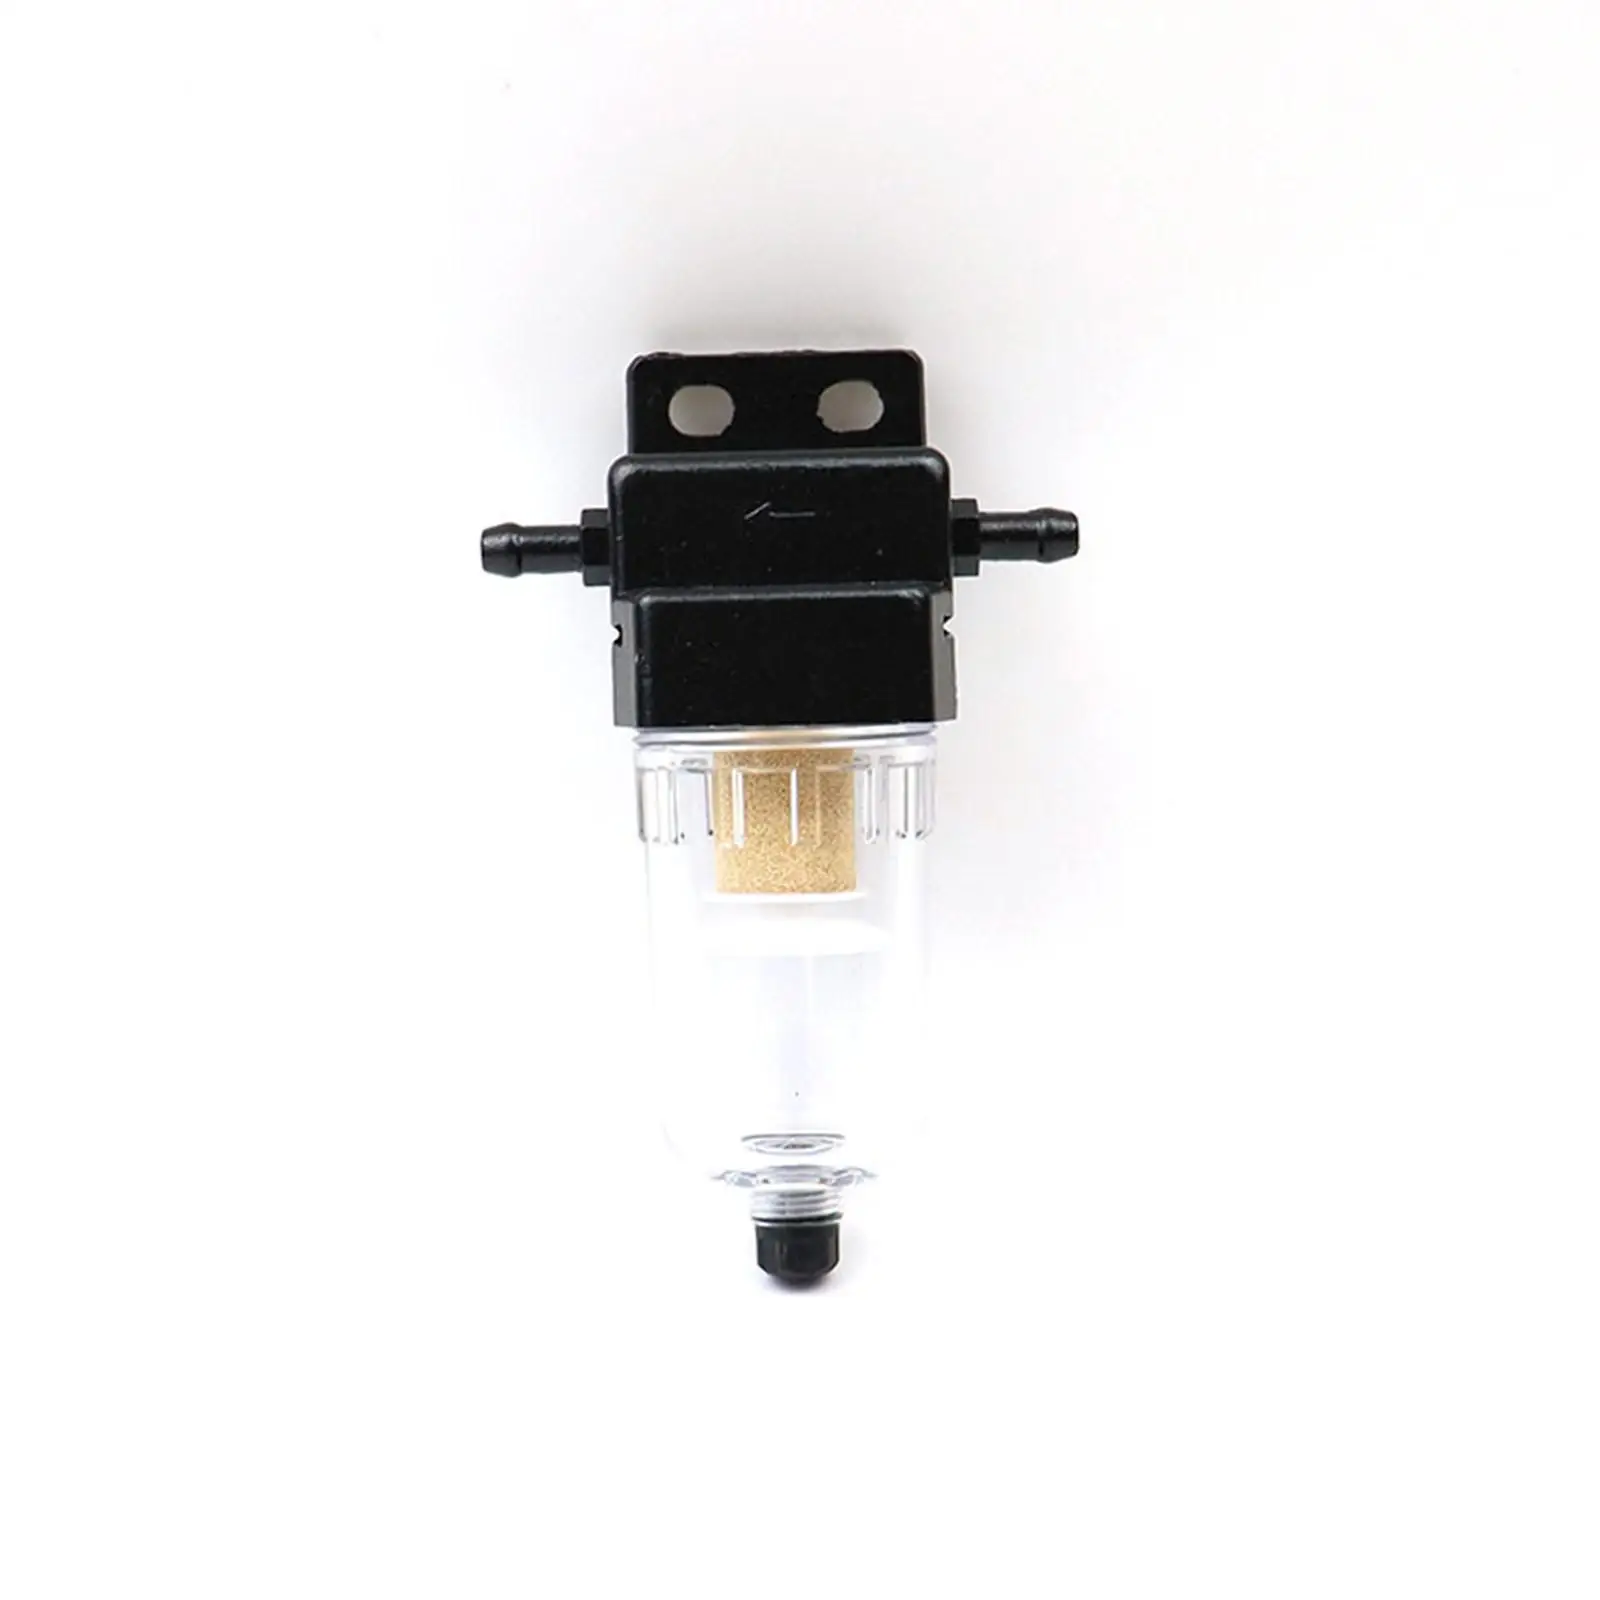 Car Fuel Filter Water Separator Kit Replacement for Webasto Good Performance Fuel Engine Accessories Easy to Install